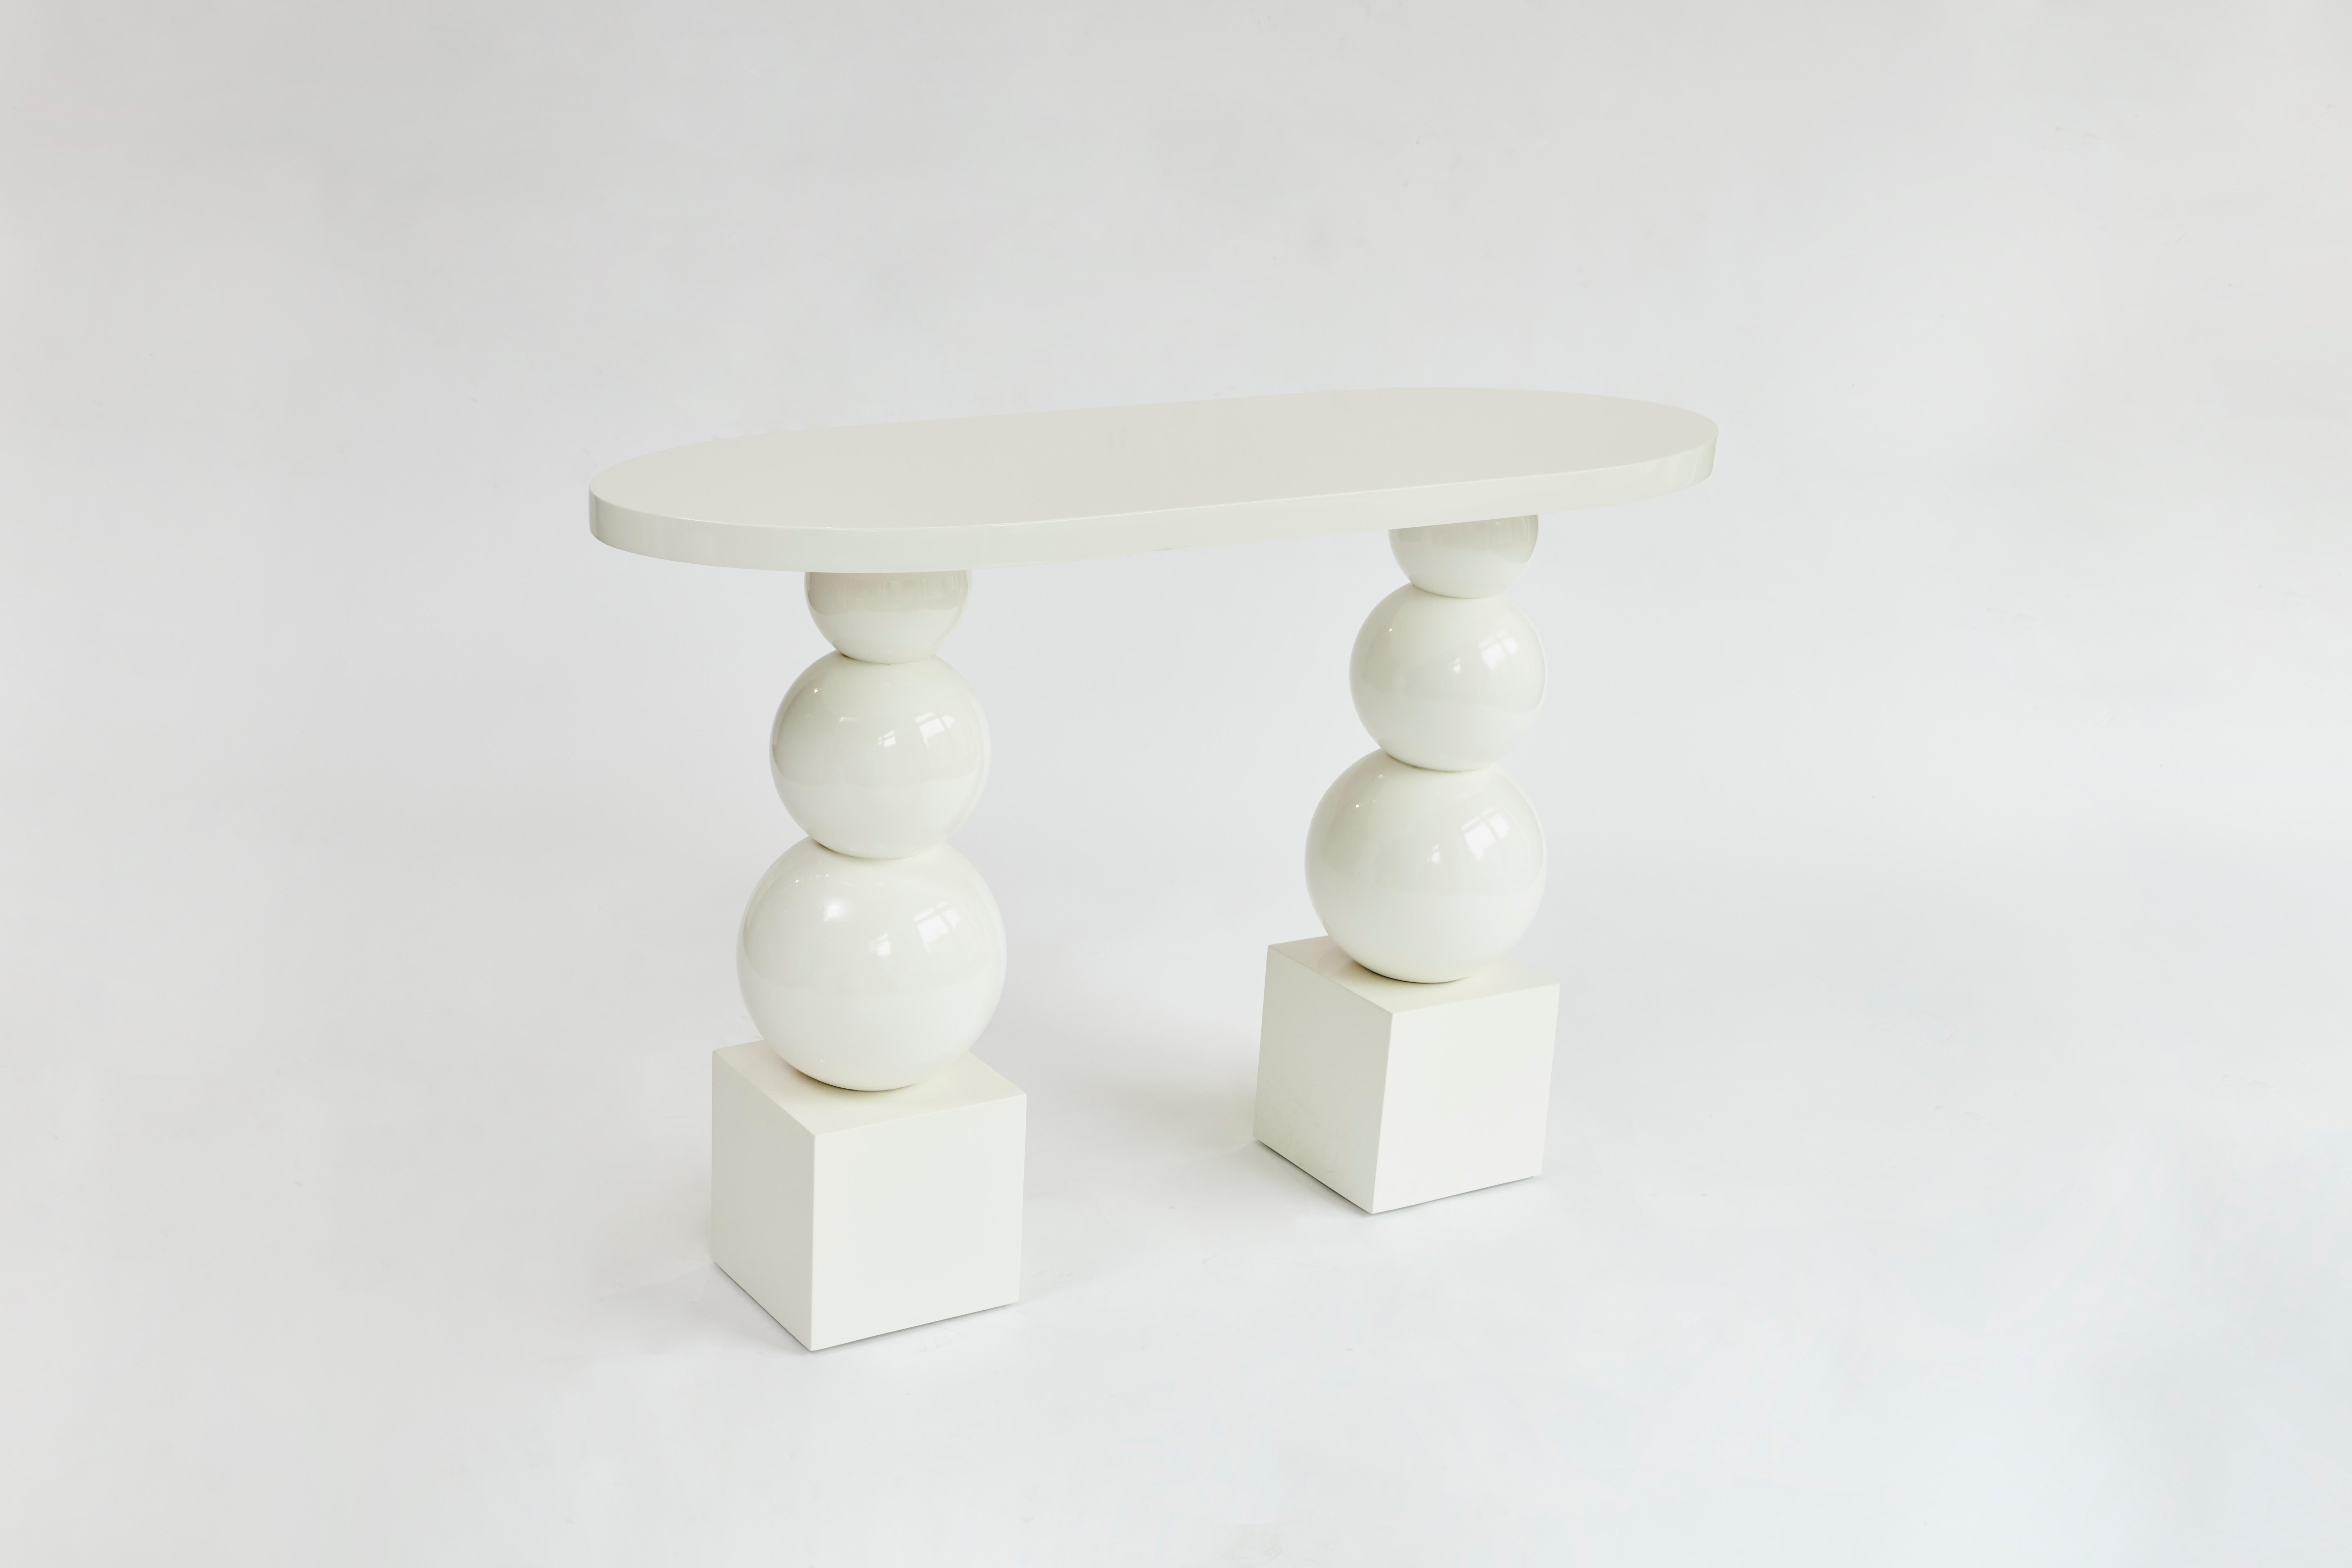 Made to order white lacquer console table designed by Christian Siriano.

Material: White lacquer (available in custom finish)

Dimensions:
Overall Width: 48”
Overall Depth: 16” 
Overall Height: 32”
